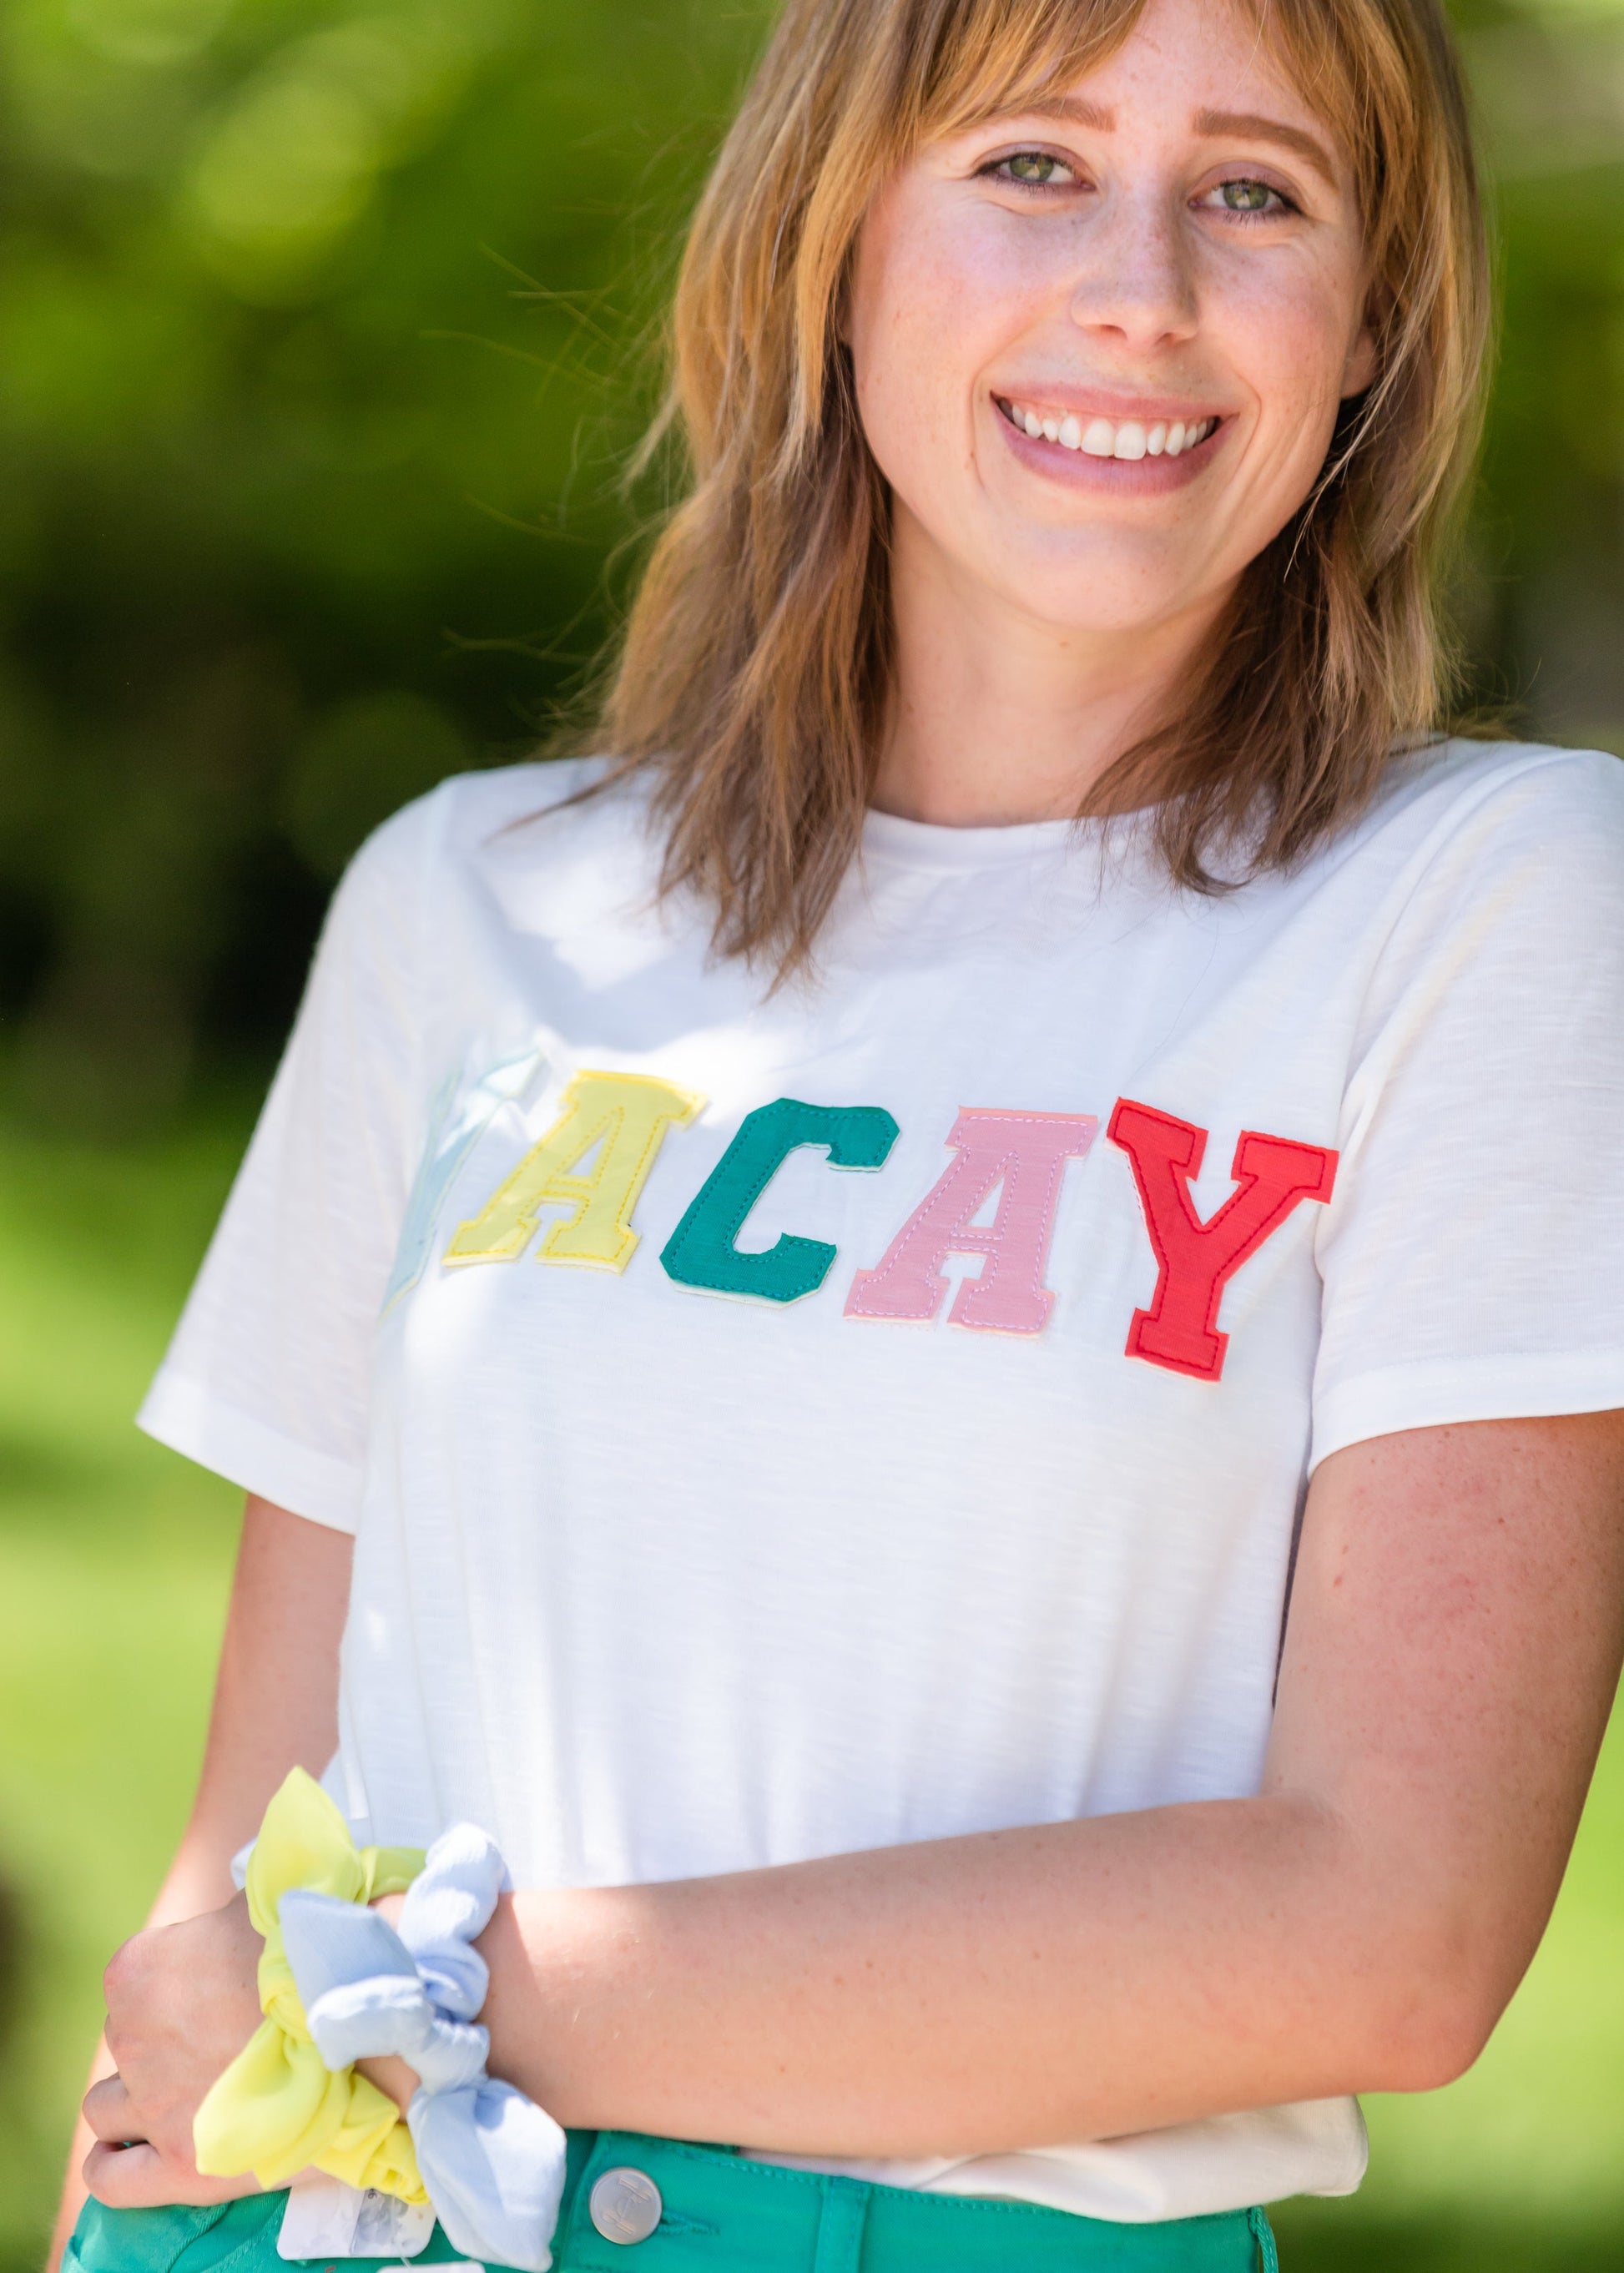 Front Patched Vacay Ivory Tee Shirt - FINAL SALE Tops